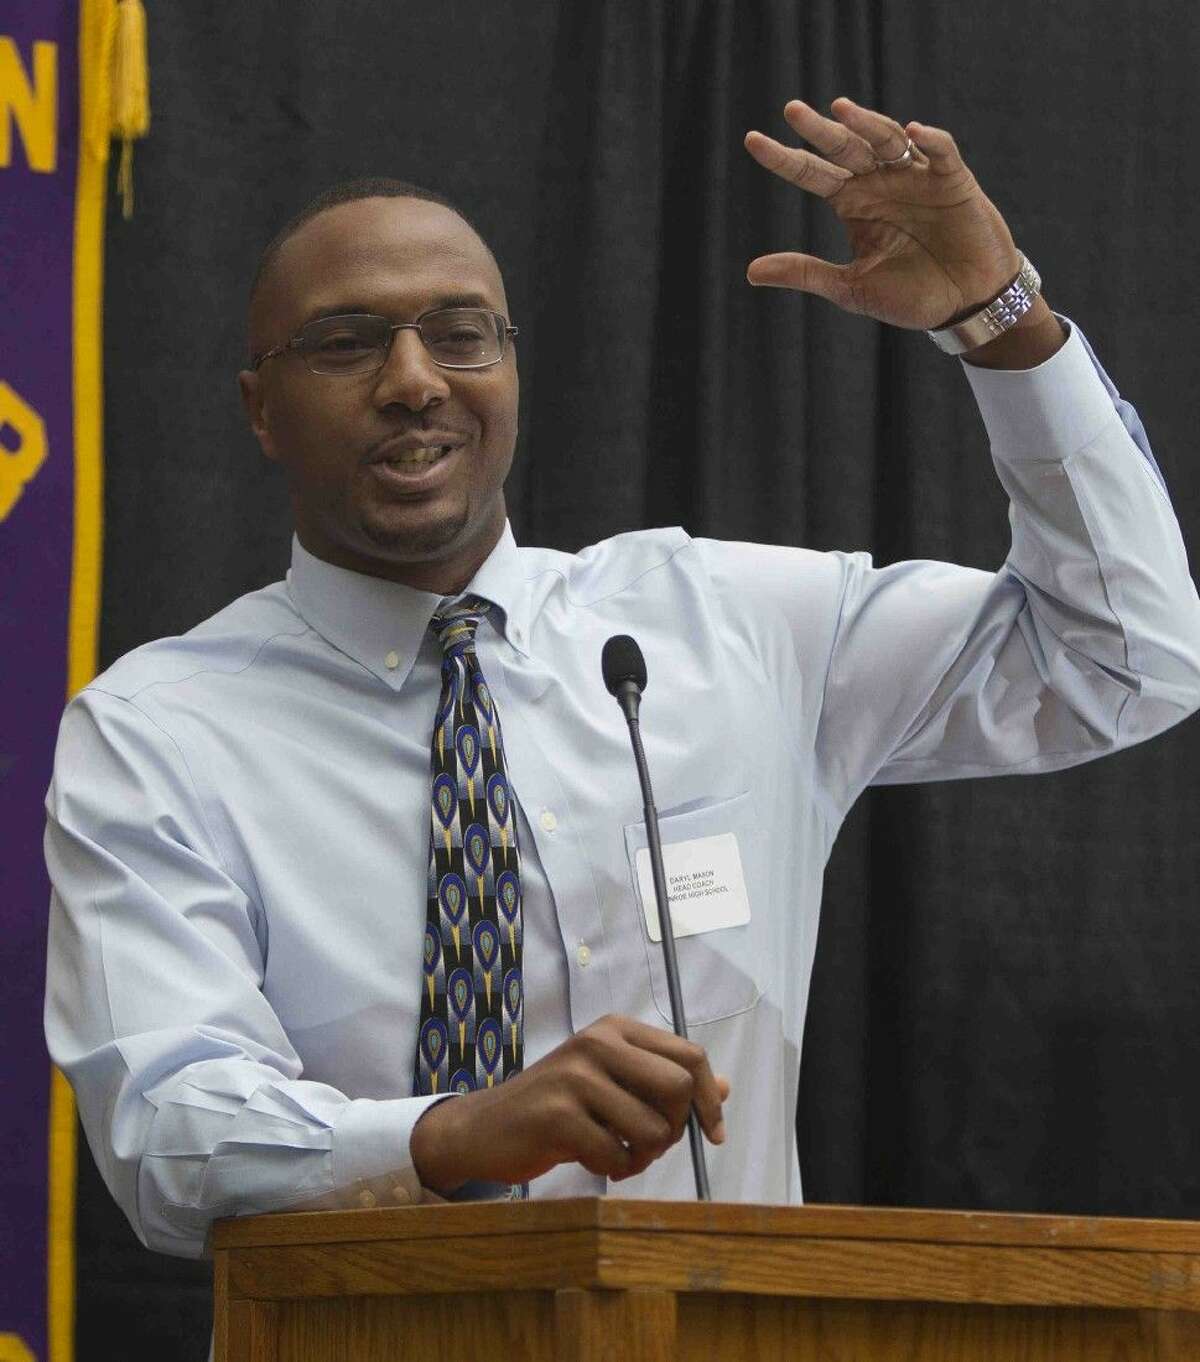 Conroe coach Daryl Mason speaks about the upcoming basketball season at the Conroe Noon Lions Club meeting Wednesday.